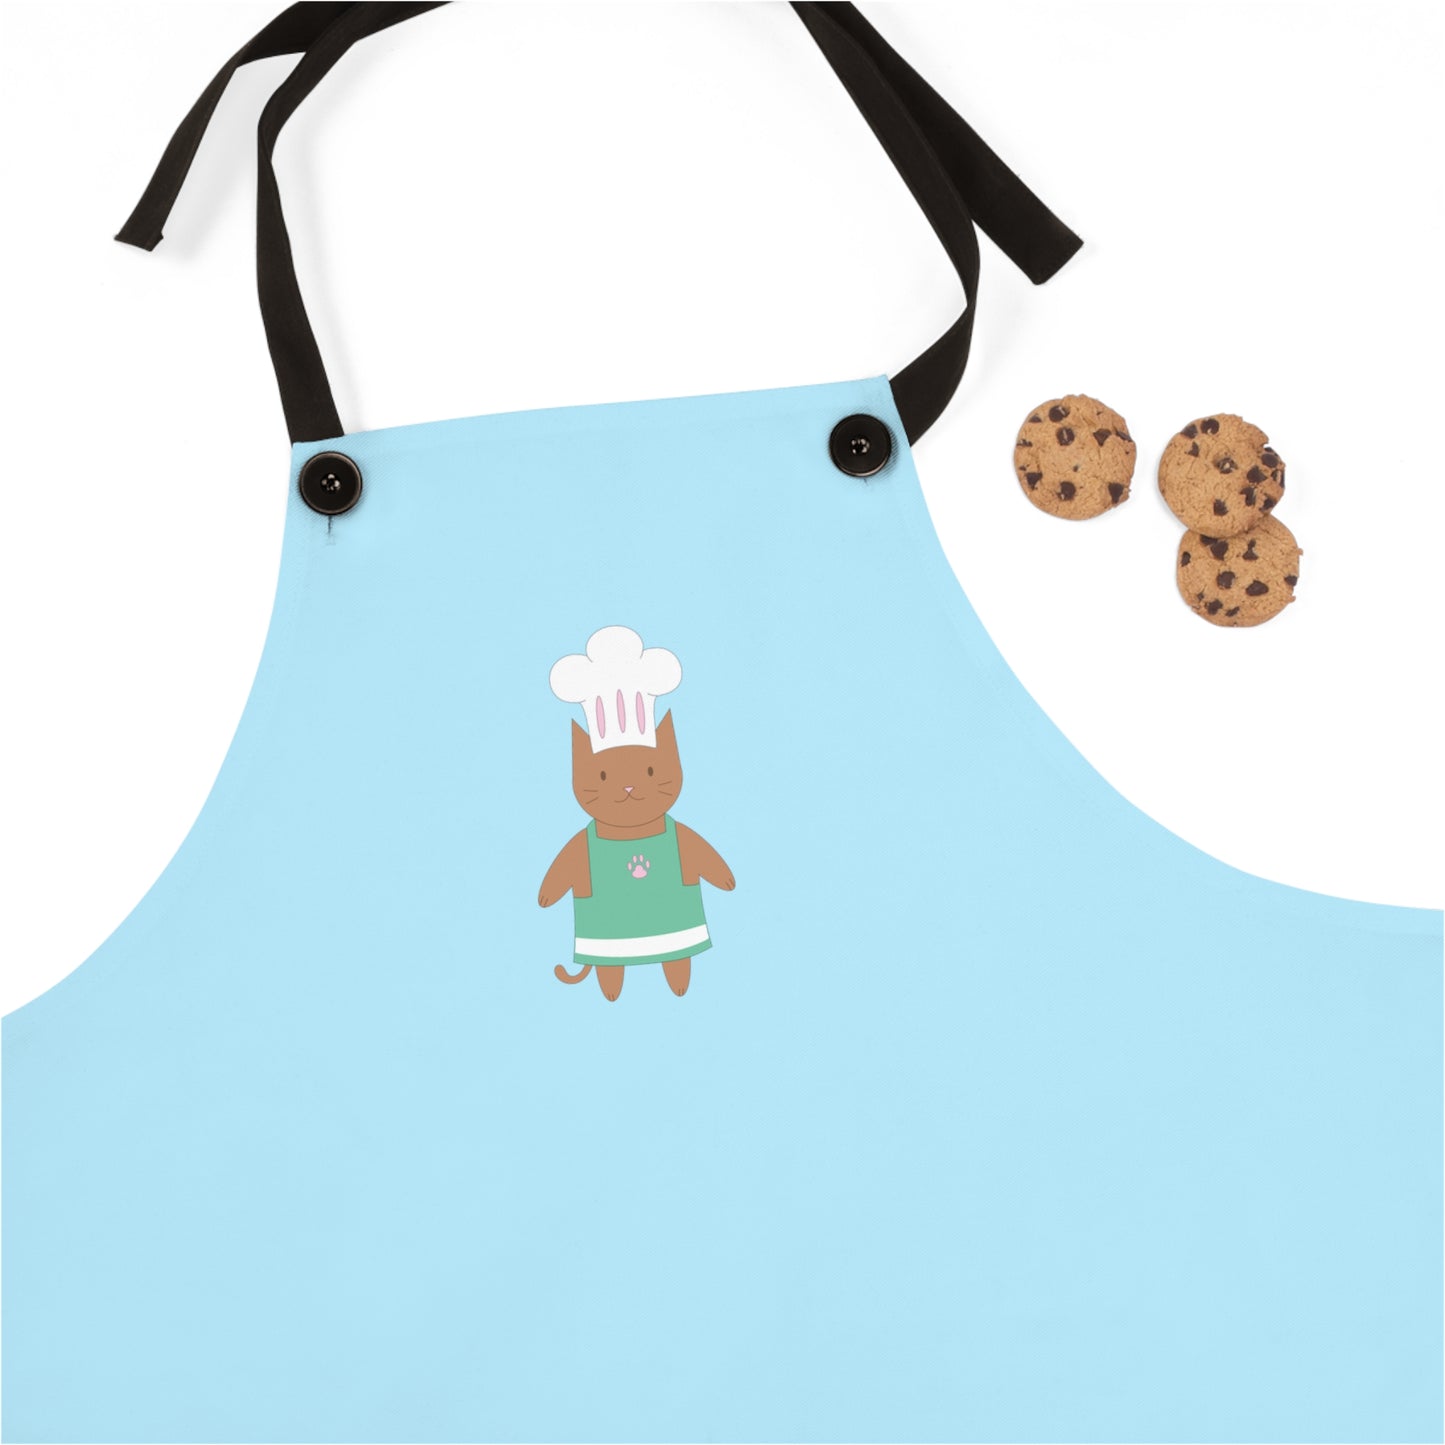 xBiscuit Baker Apron by Ghostkorie